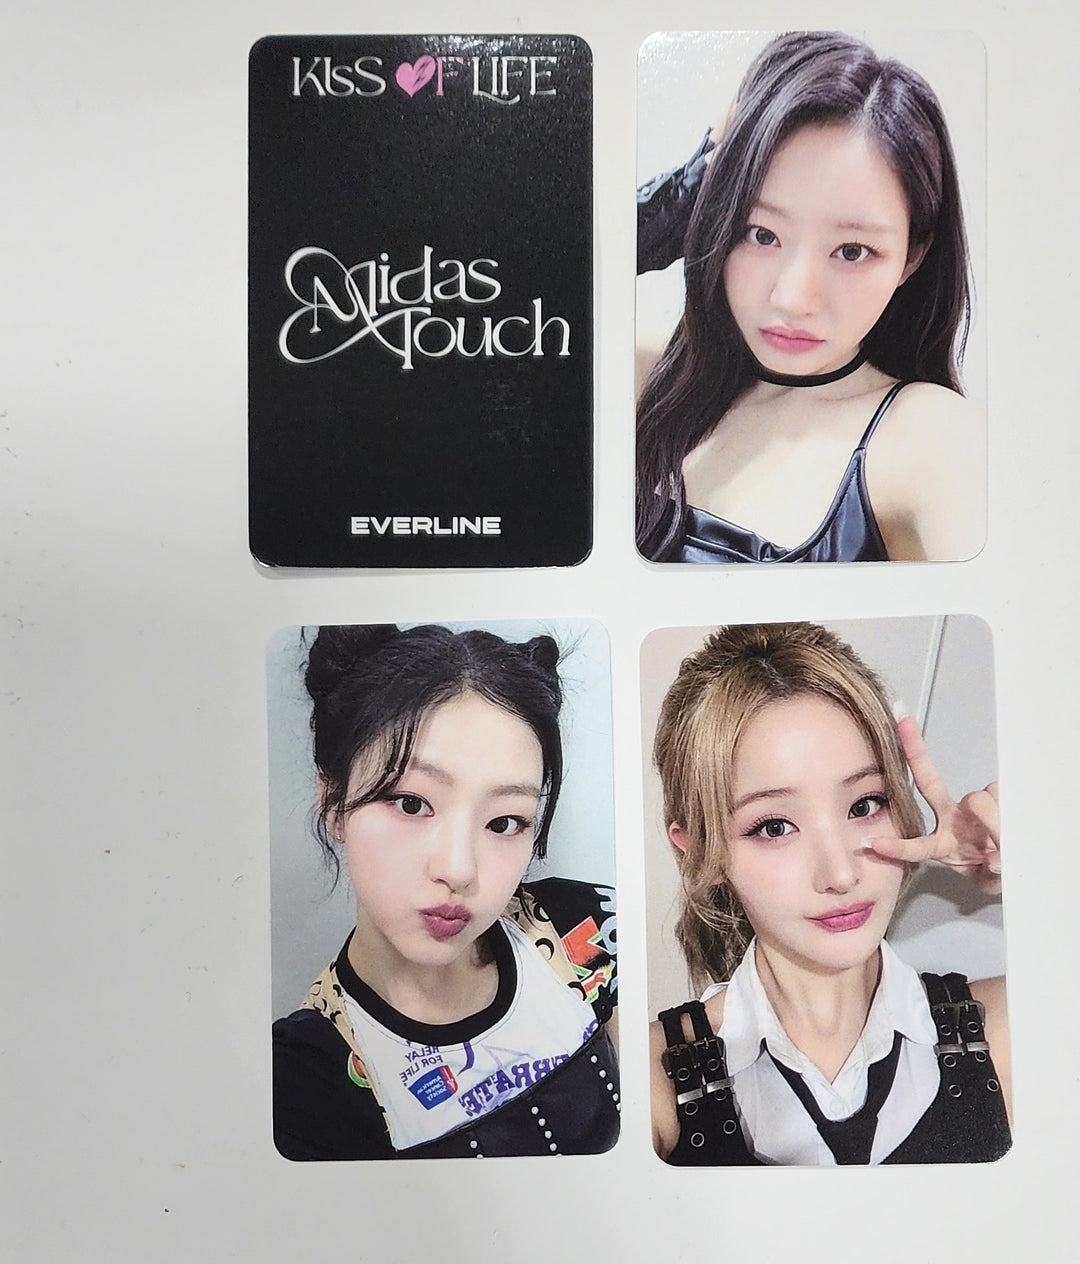 KISS OF LIFE "Midas Touch" - Everline Fansign Event Photocard Round 3 [24.5.21]